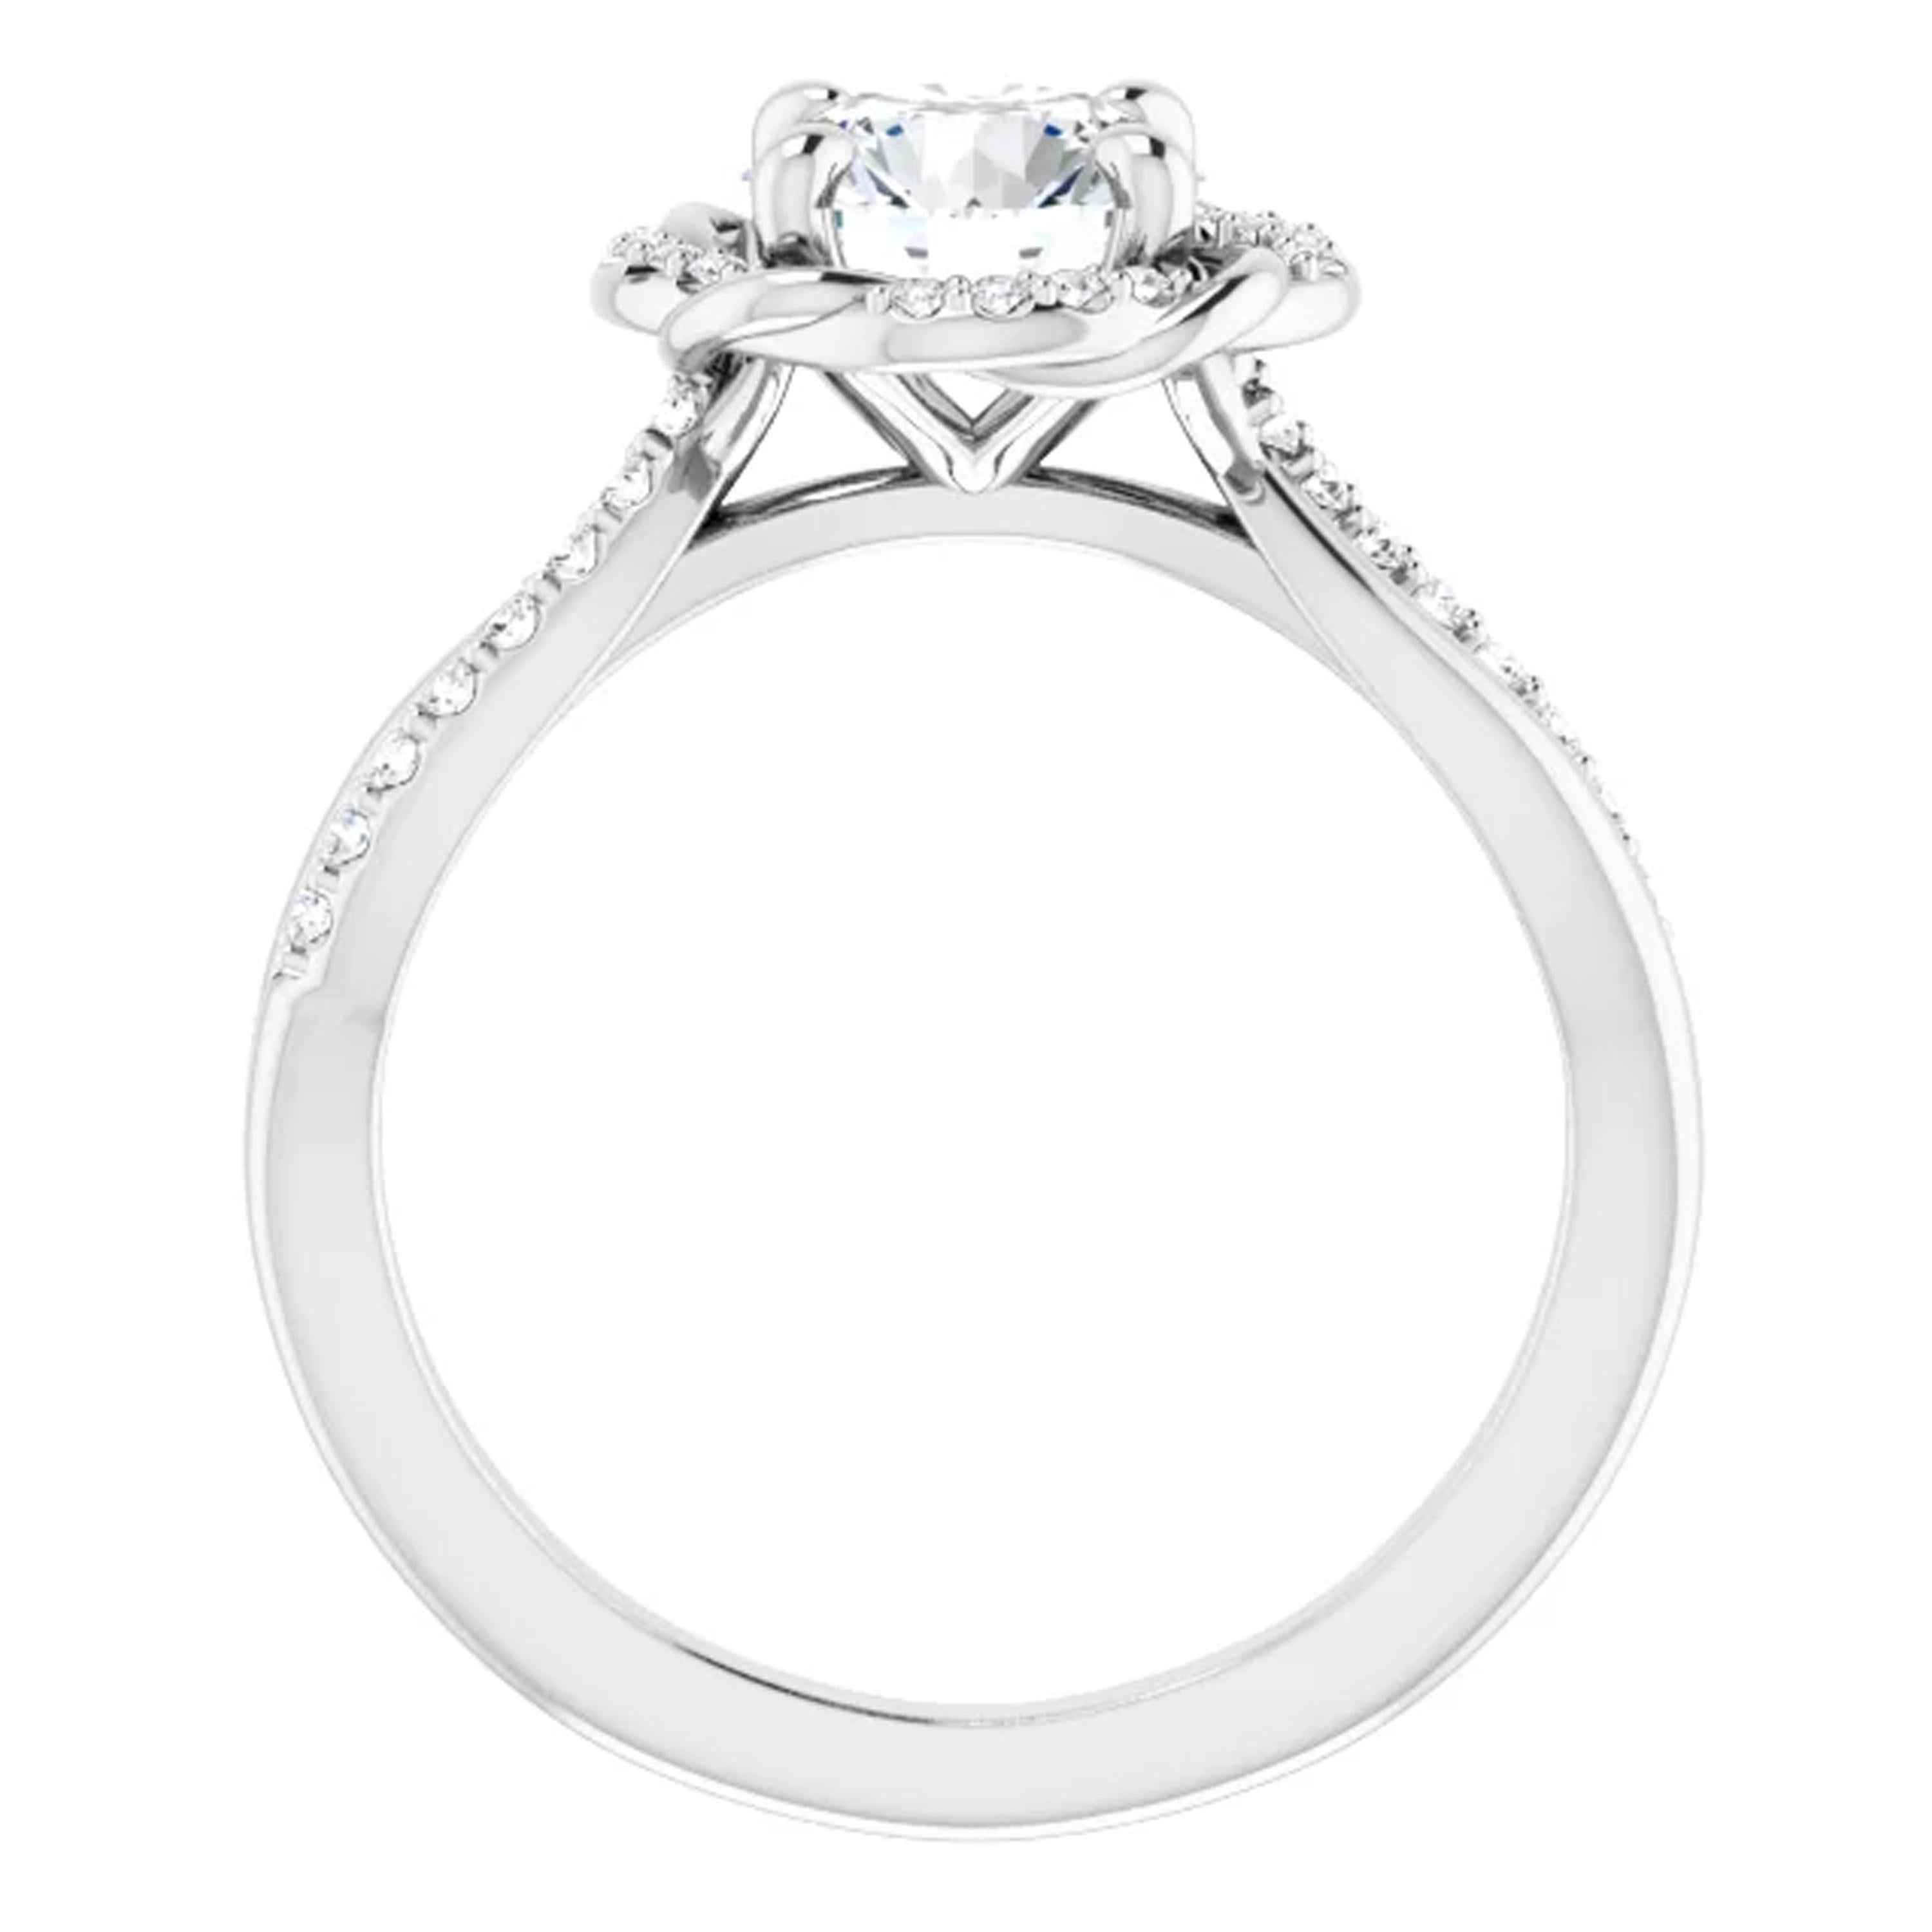 This unique engagement ring features a twisted diamond accented halo. Shimmering diamonds line the split shank and surround the halo. Propose with confidence with this breathtaking ring that guarantees captivating her heart.

Style No. :